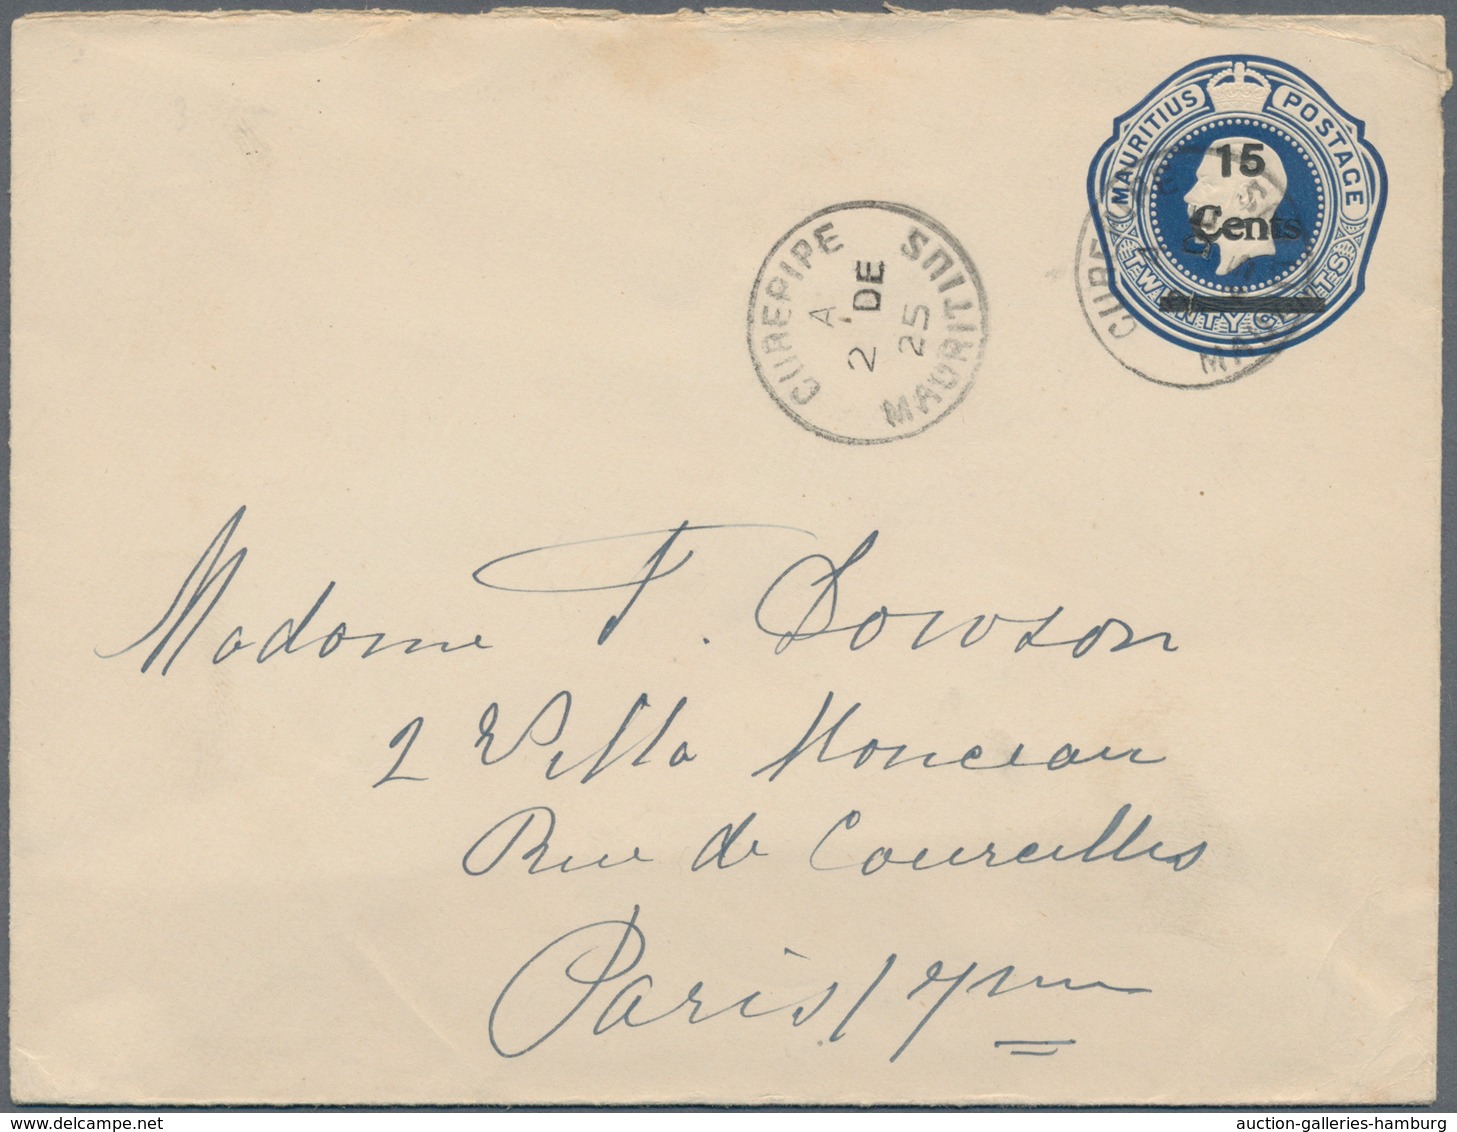 Mauritius: 1925. King George V 20c Blue Envelope Overprinted 15 Cents In Black Cancelled Curepipe A - Mauricio (...-1967)